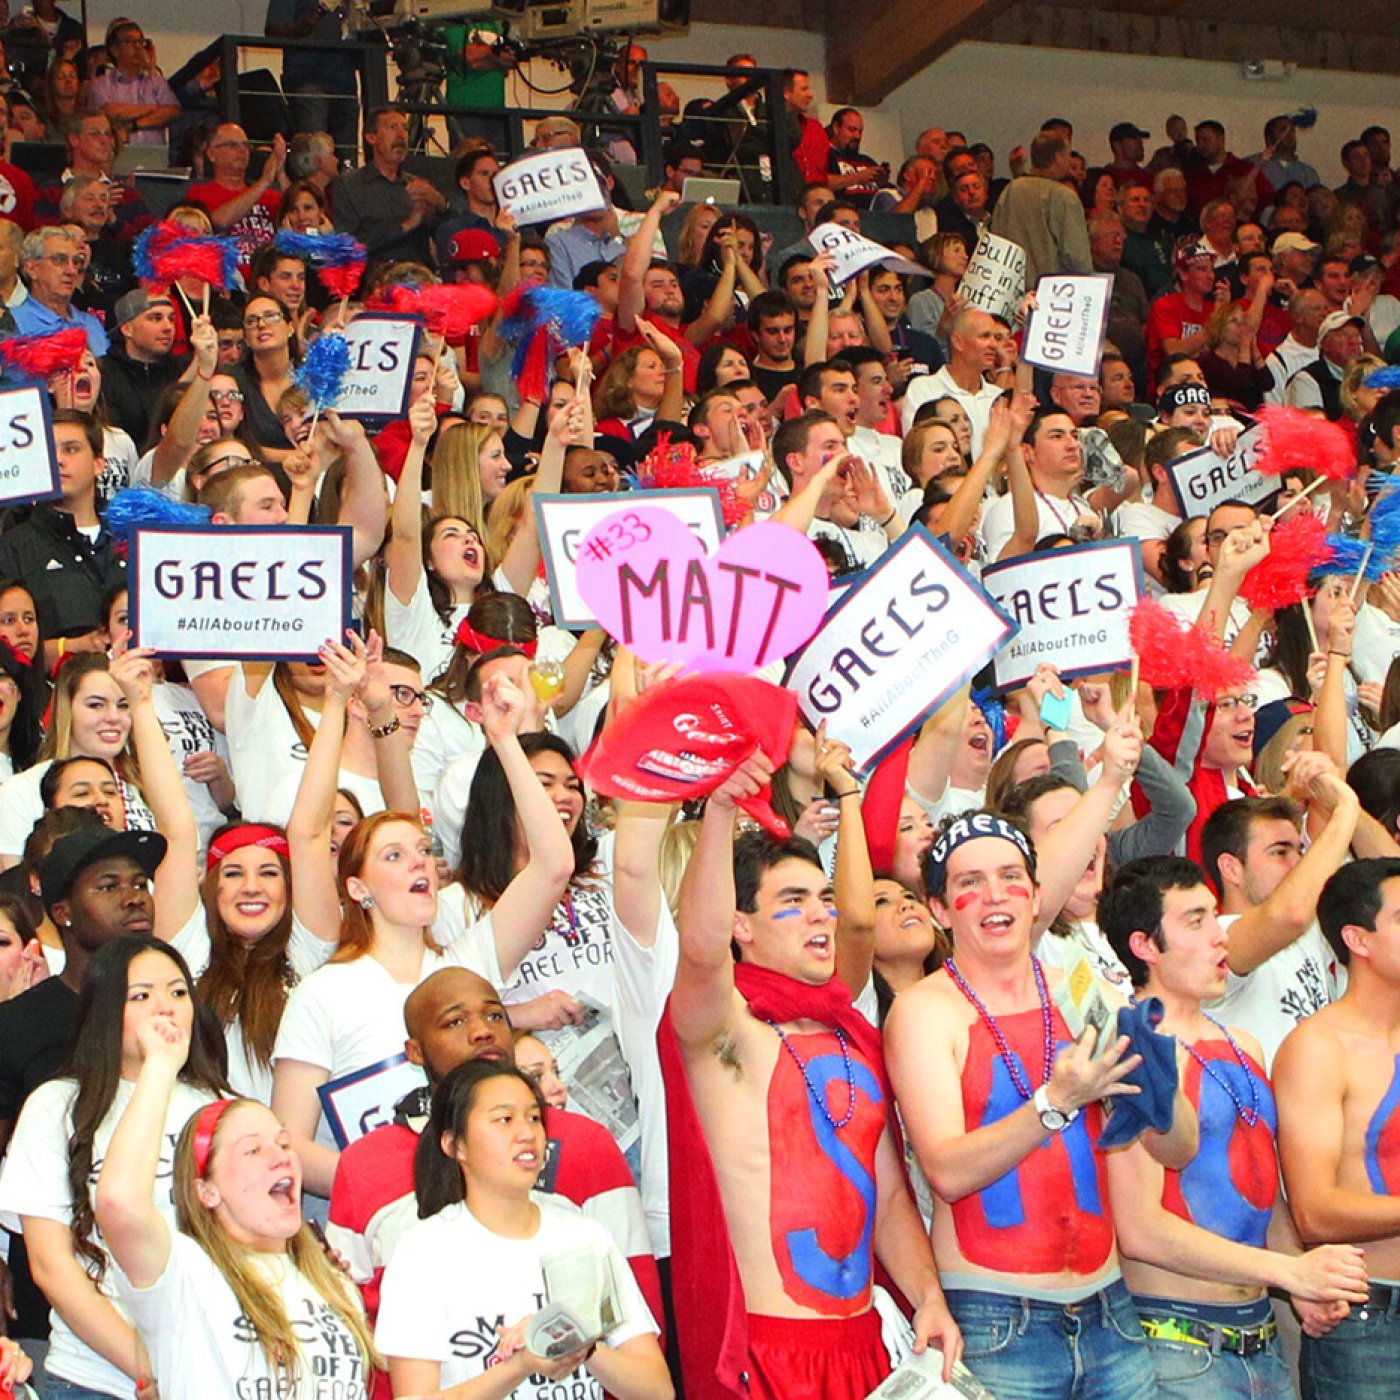 Students cheer at the Saint Mary's vs. Gonzaga basketball game in 2013